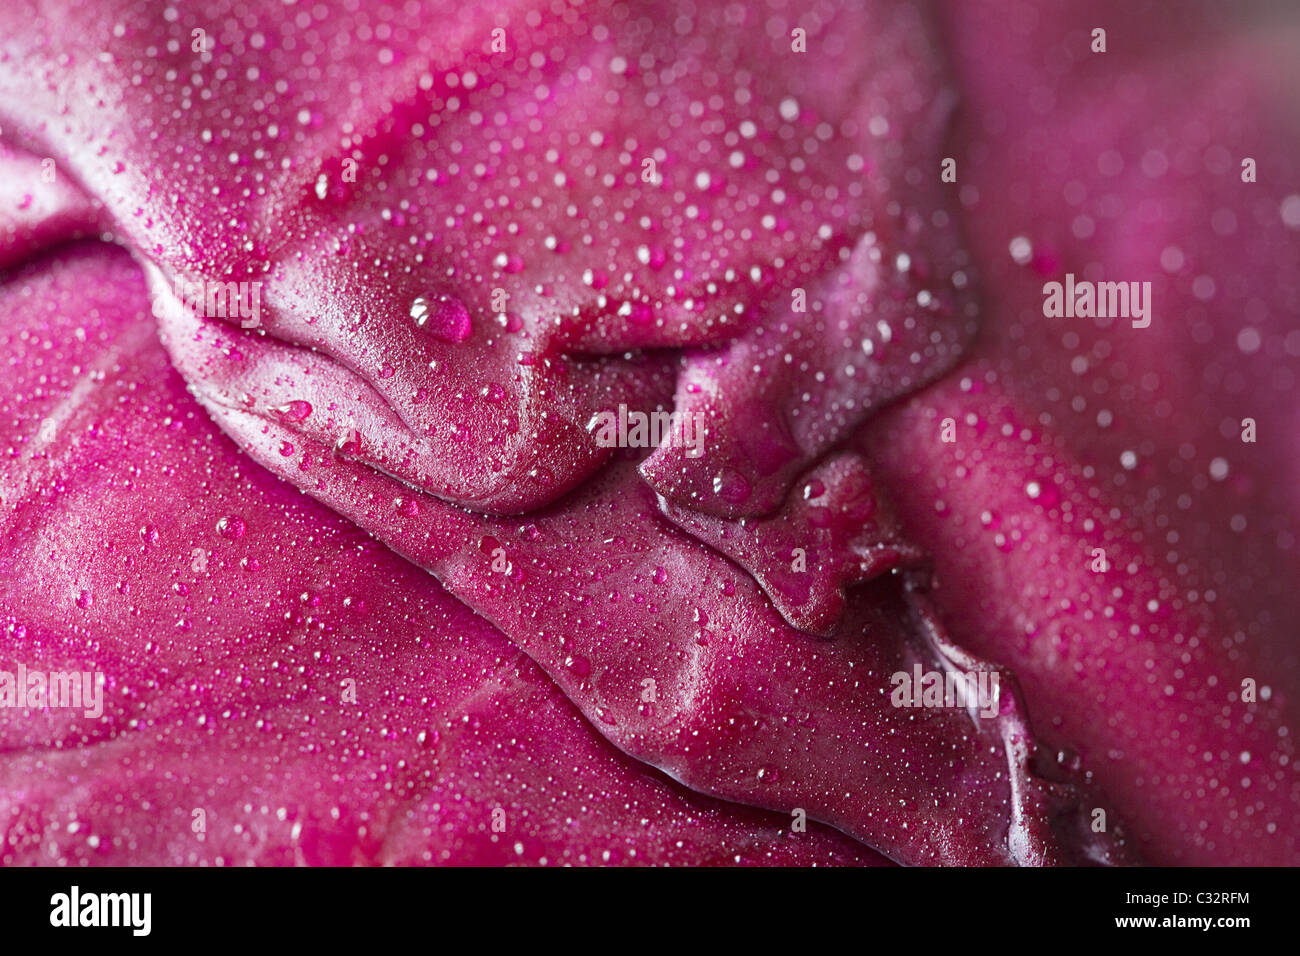 Red cabbage leaf, full frame Stock Photo